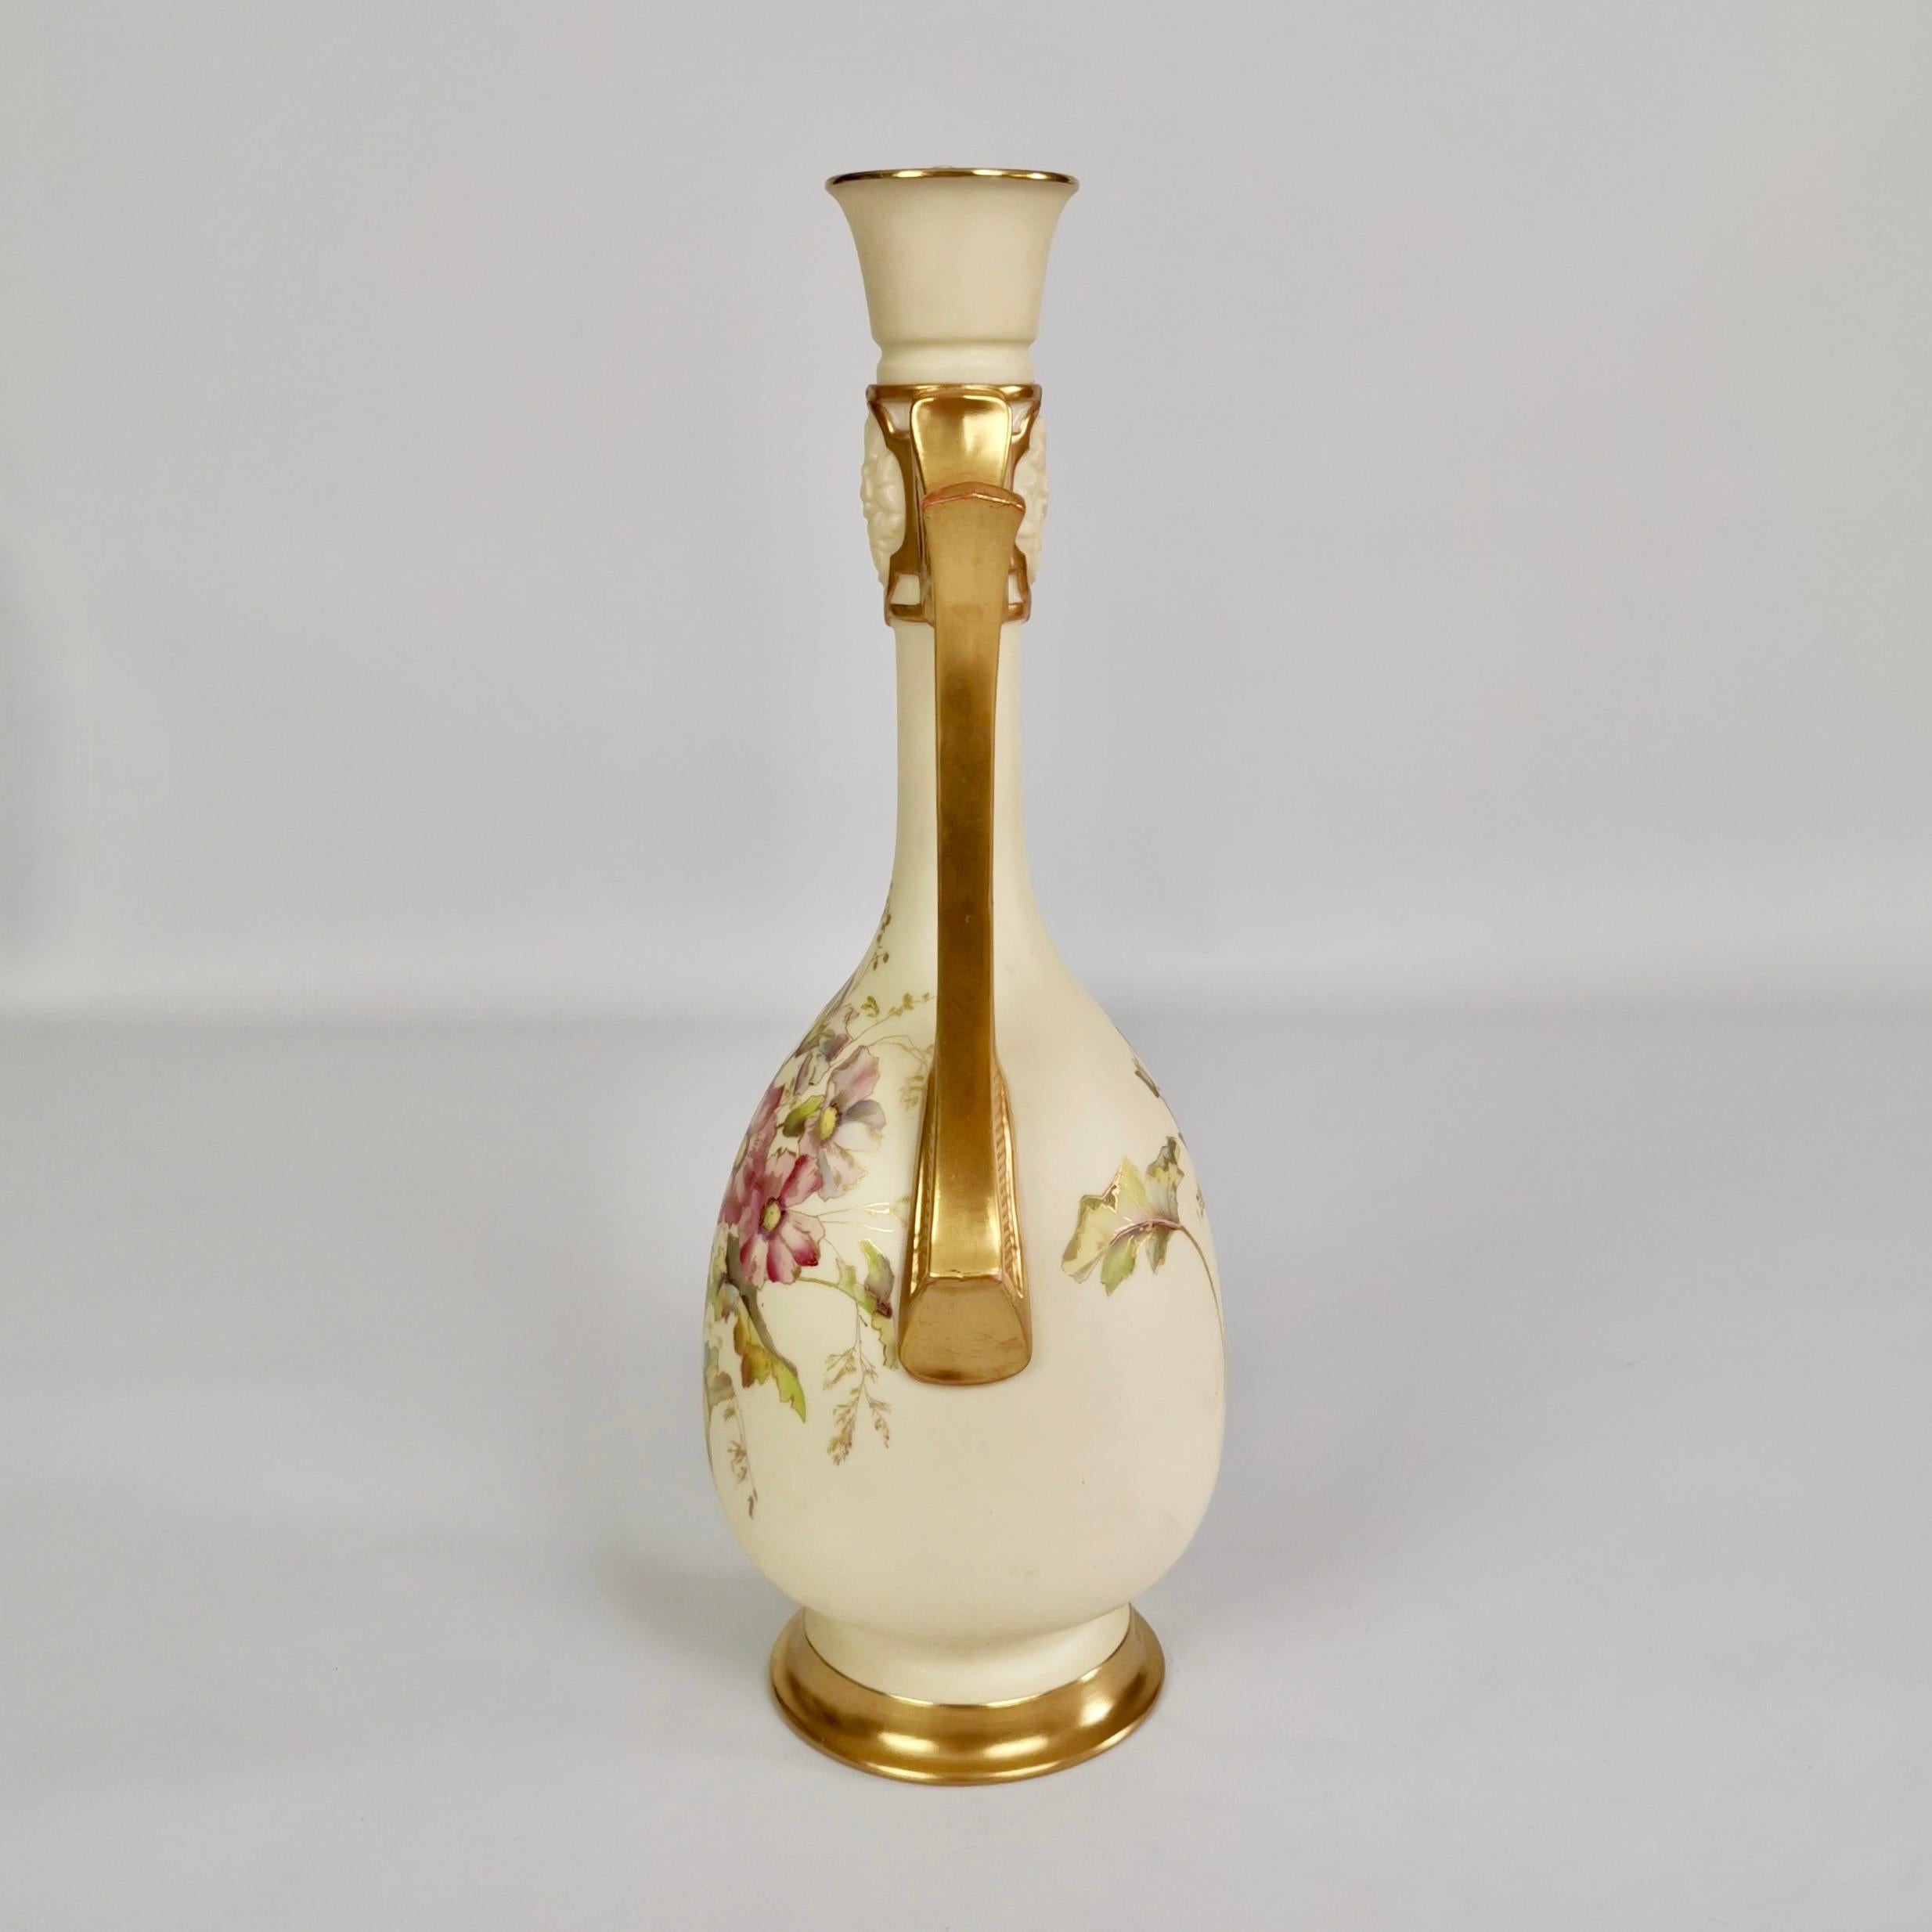 This is a stunning ewer made by Royal Worcester in 1891. The ewer has a 